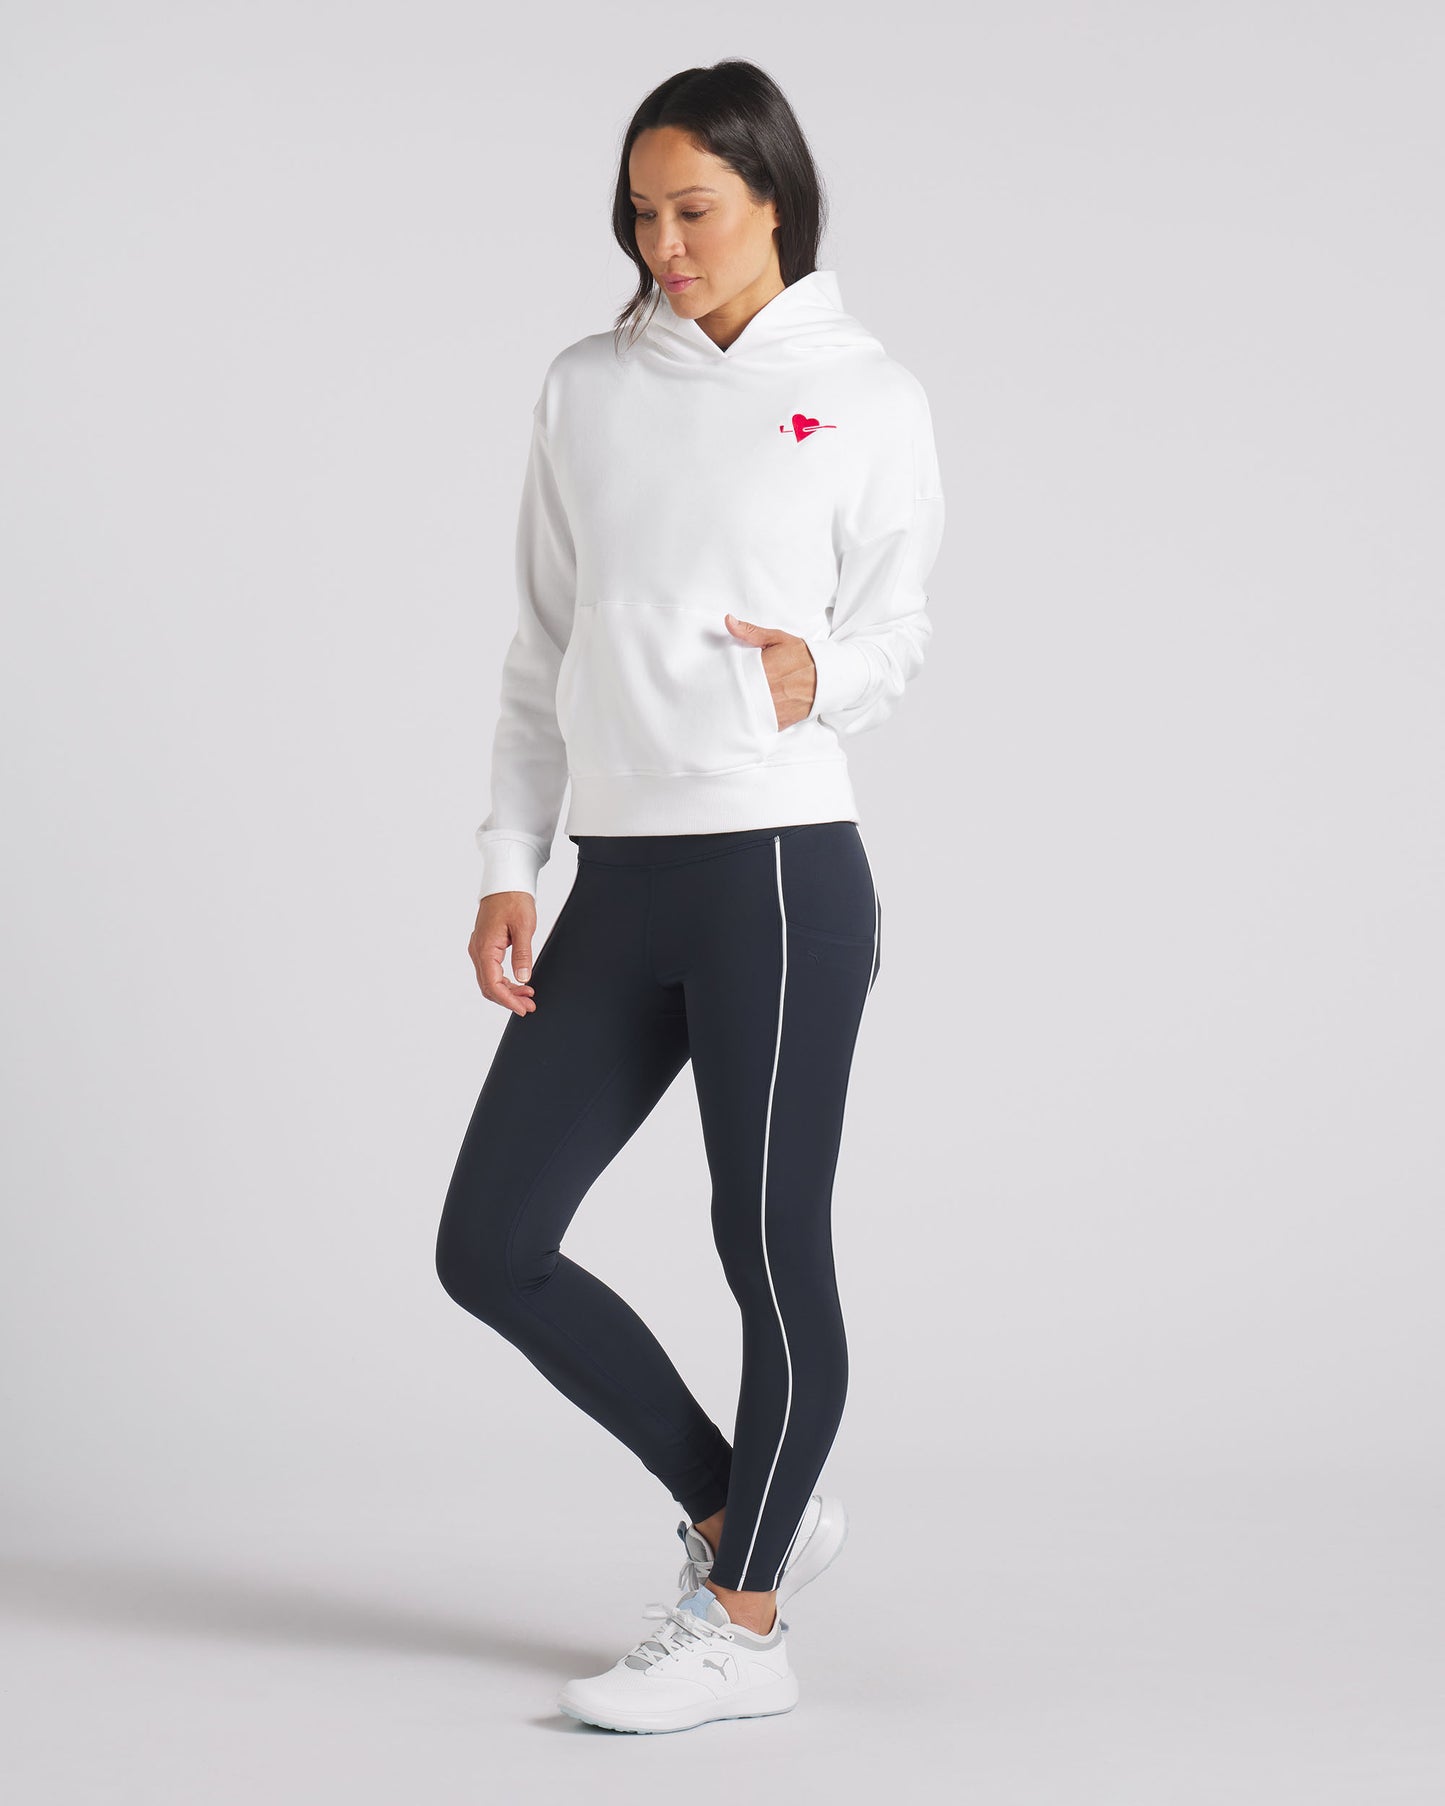 Puma Ladies You-V Leggings in Deep Navy with White Piping Detail